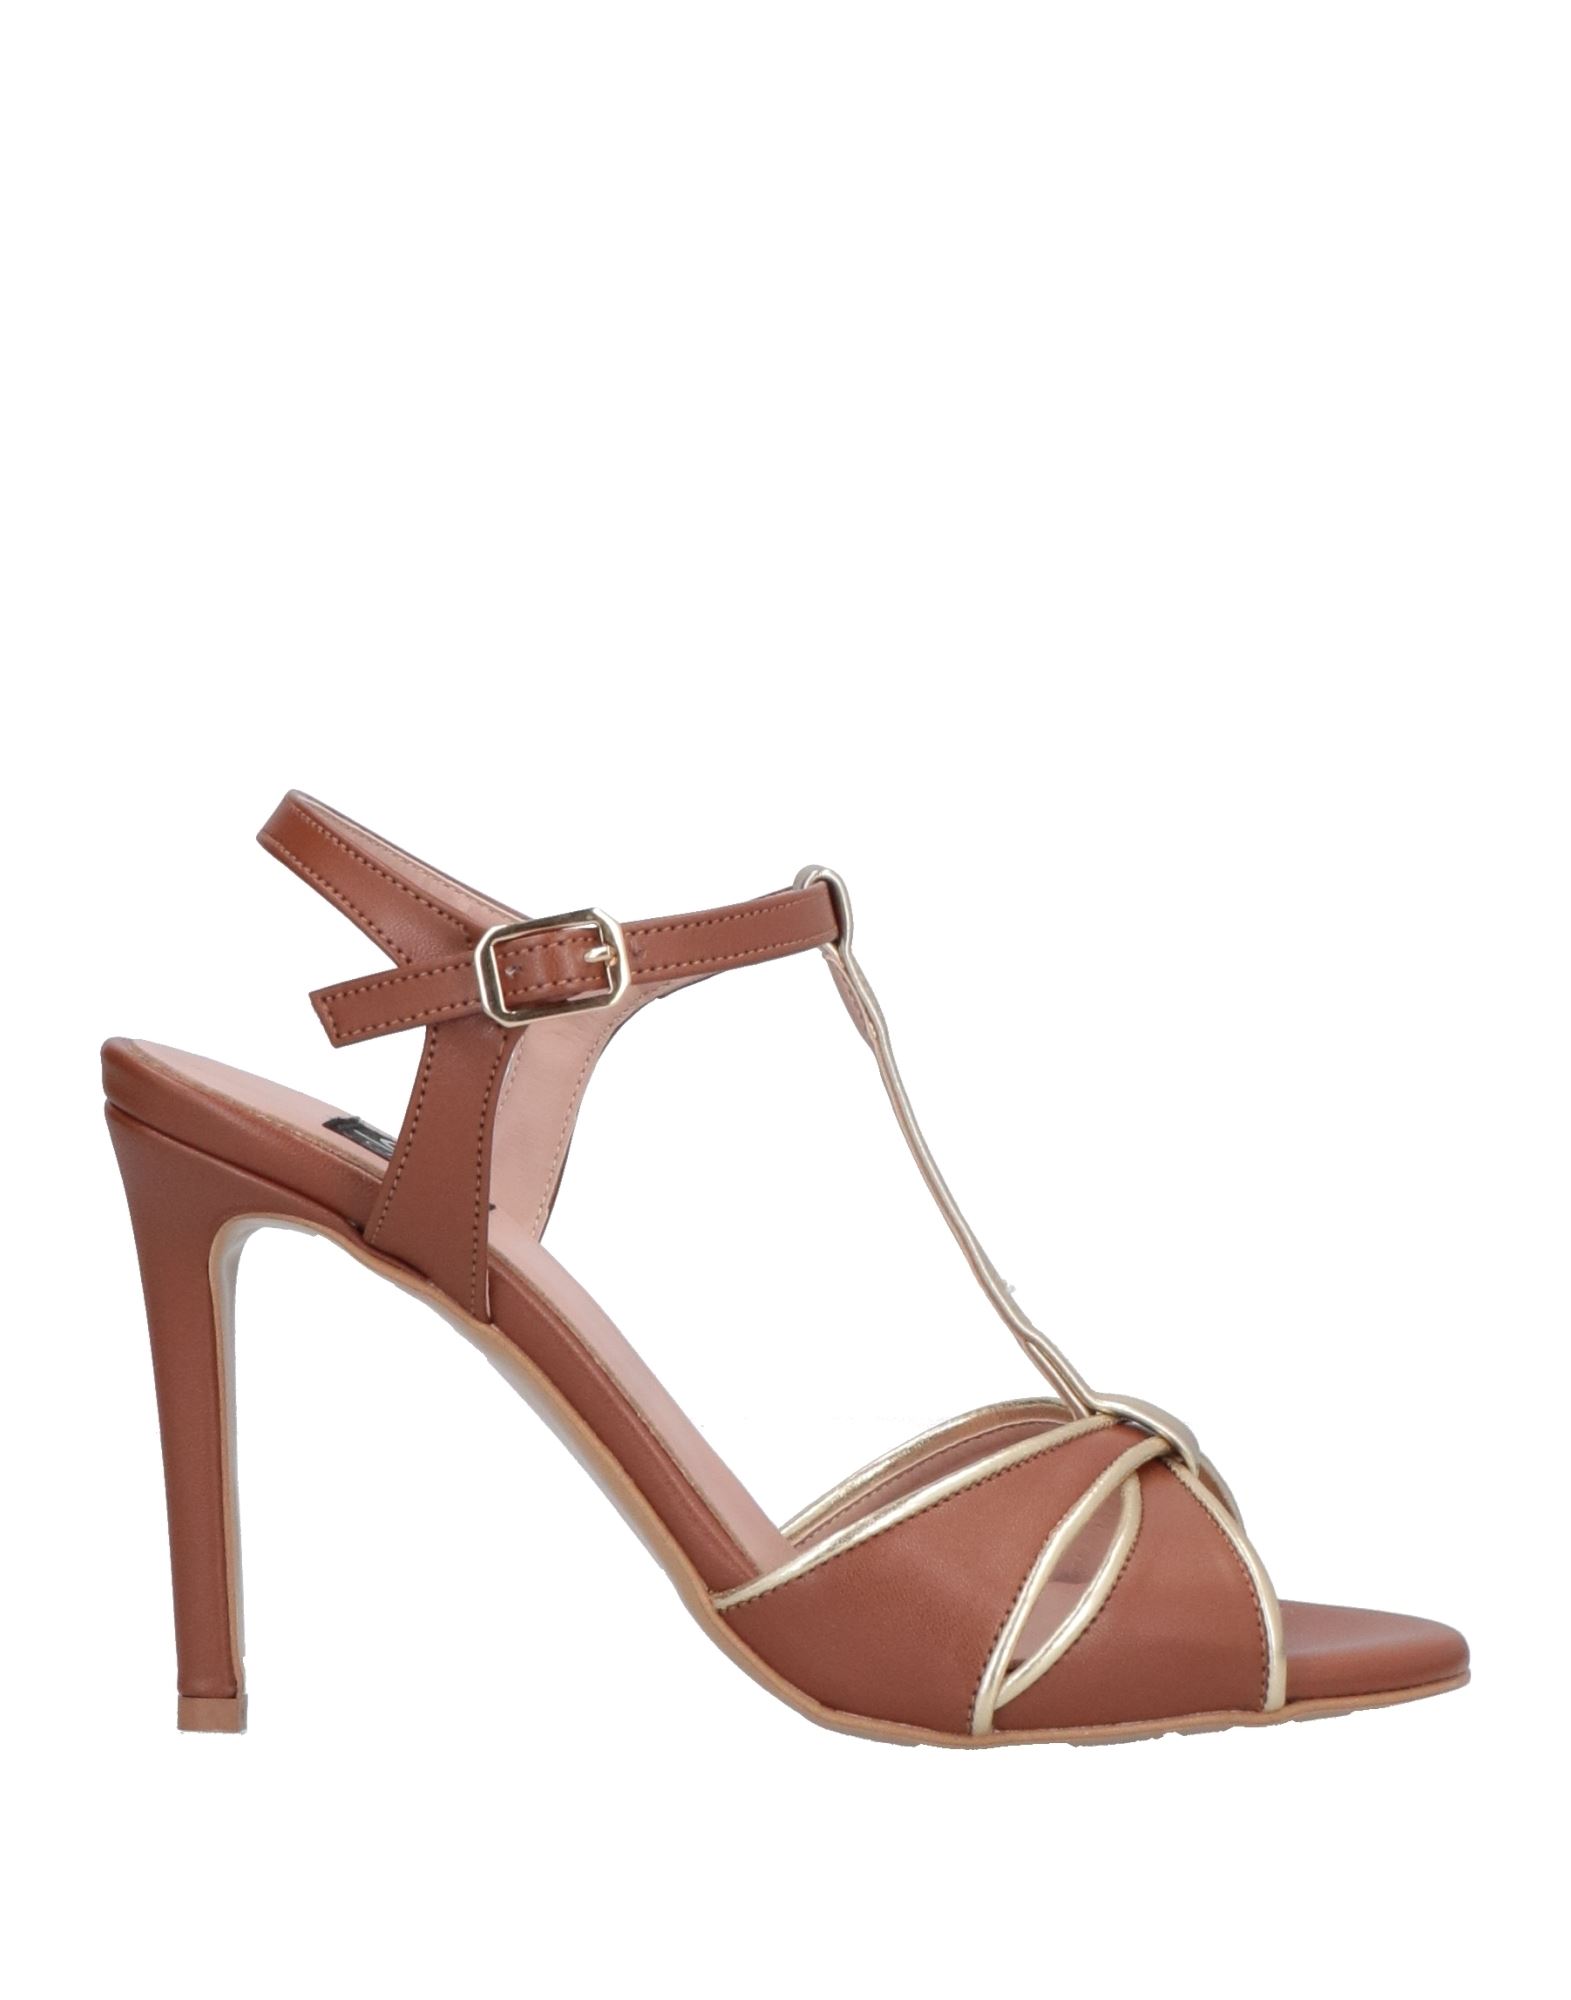 Islo Isabella Lorusso Sandals In Brown